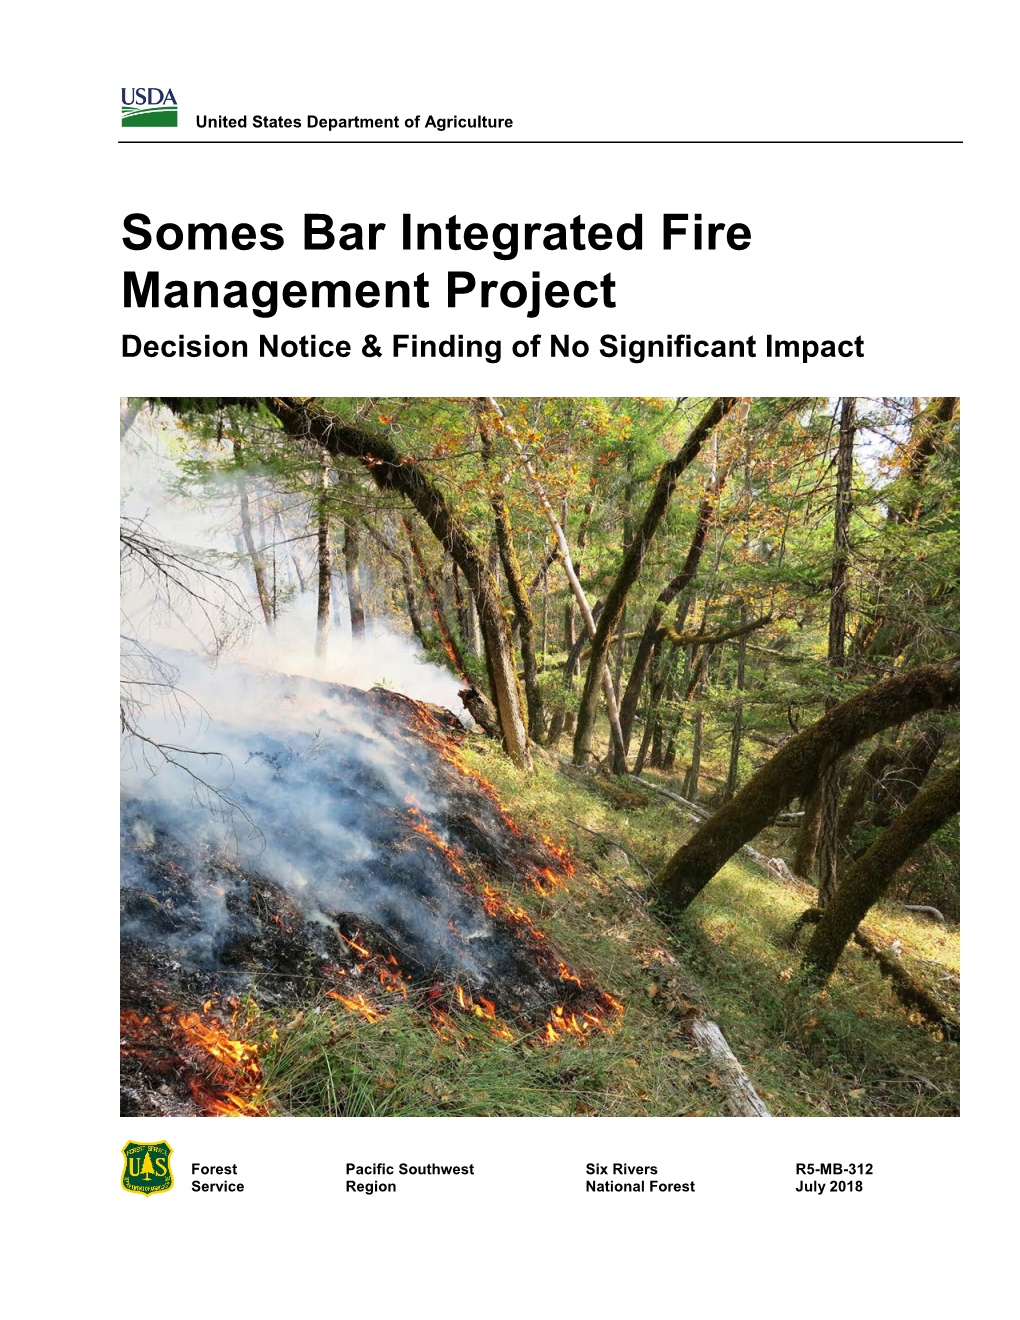 Somes Bar Integrated Fire Management Project – Decision Notice & Finding of No Significant Impact